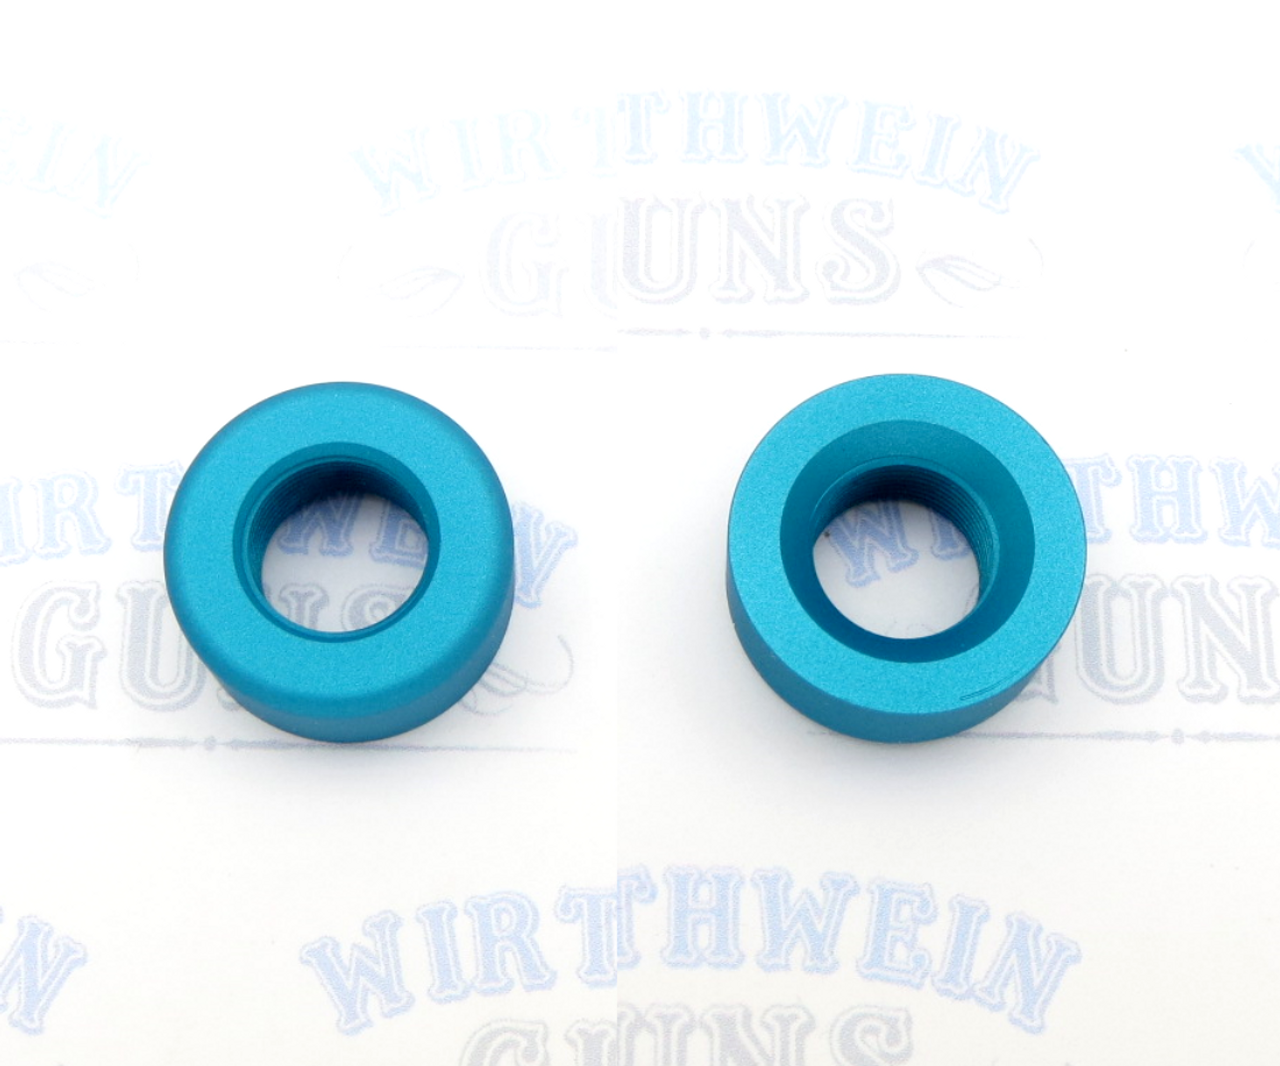 TacSol X-Ring Ruger 10/22 REPLACEMENT .920" Diameter Thread Protector (End Cap) 1/2"x28 Matte Turquoise